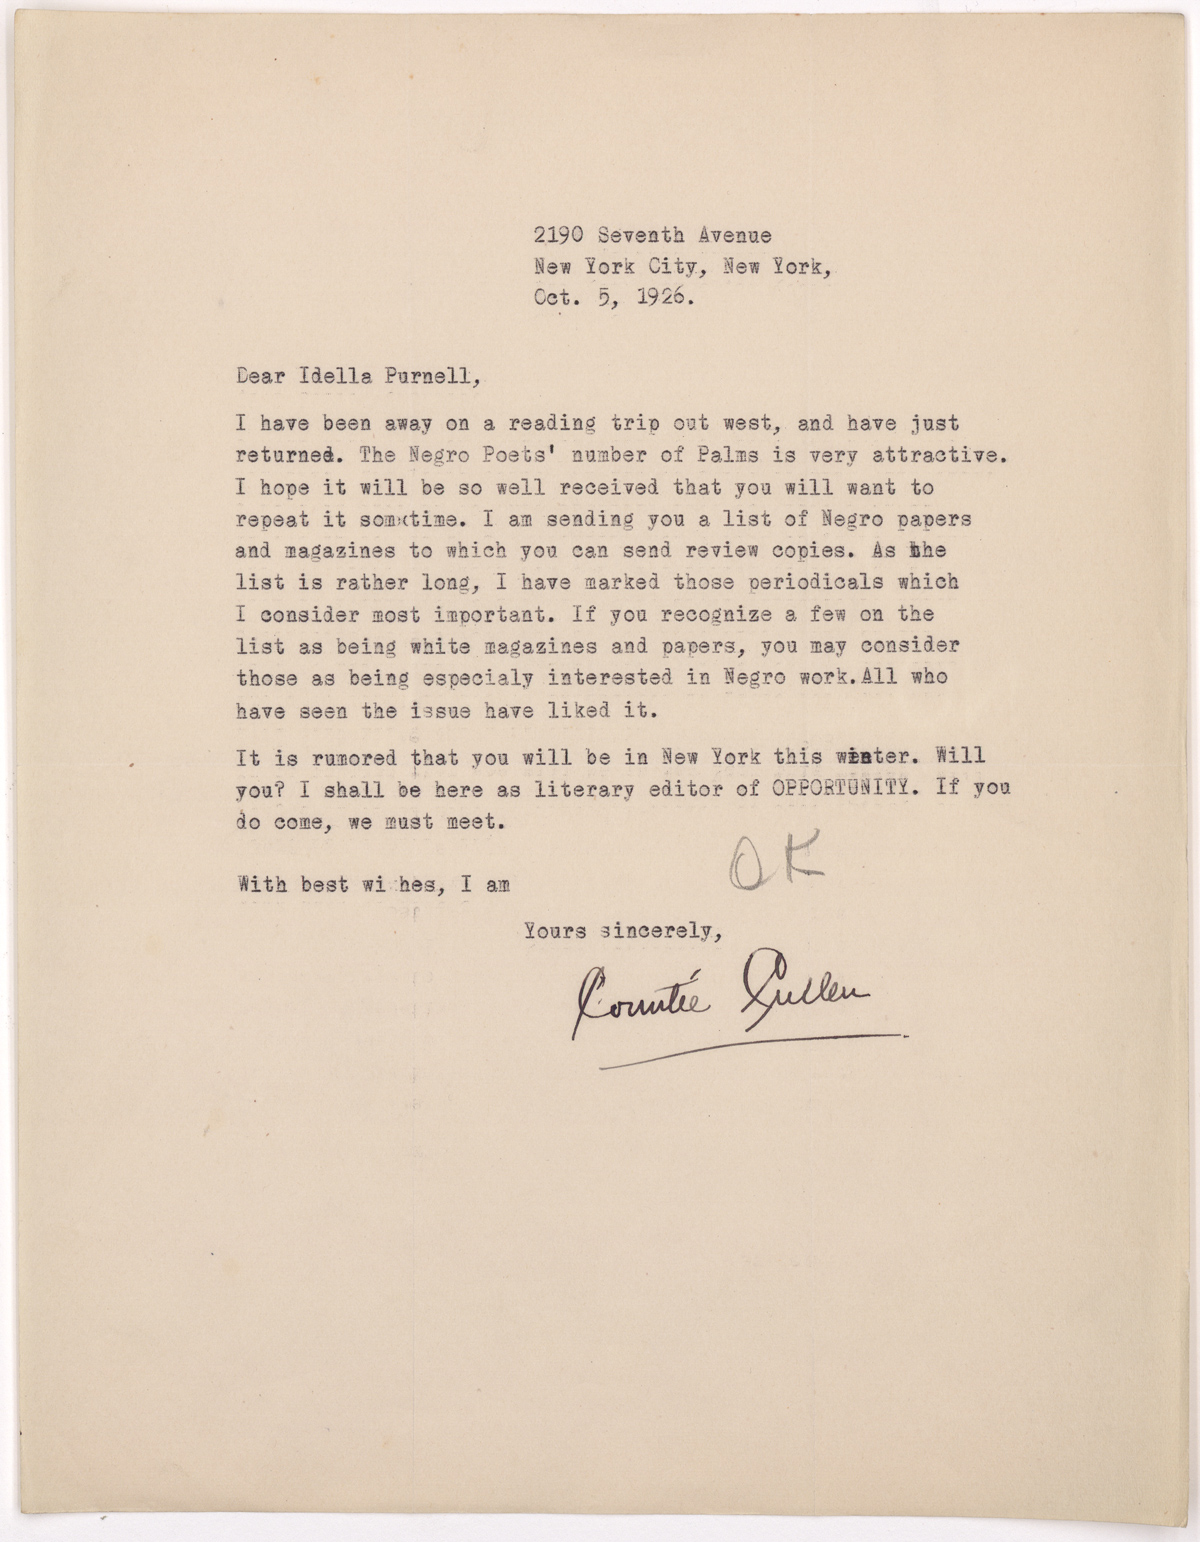 On October 5, 1926 Cullen wrote to Purnell, pleased with the appearance of the special issue of Palms and hoping that it might be repeated in the future. 